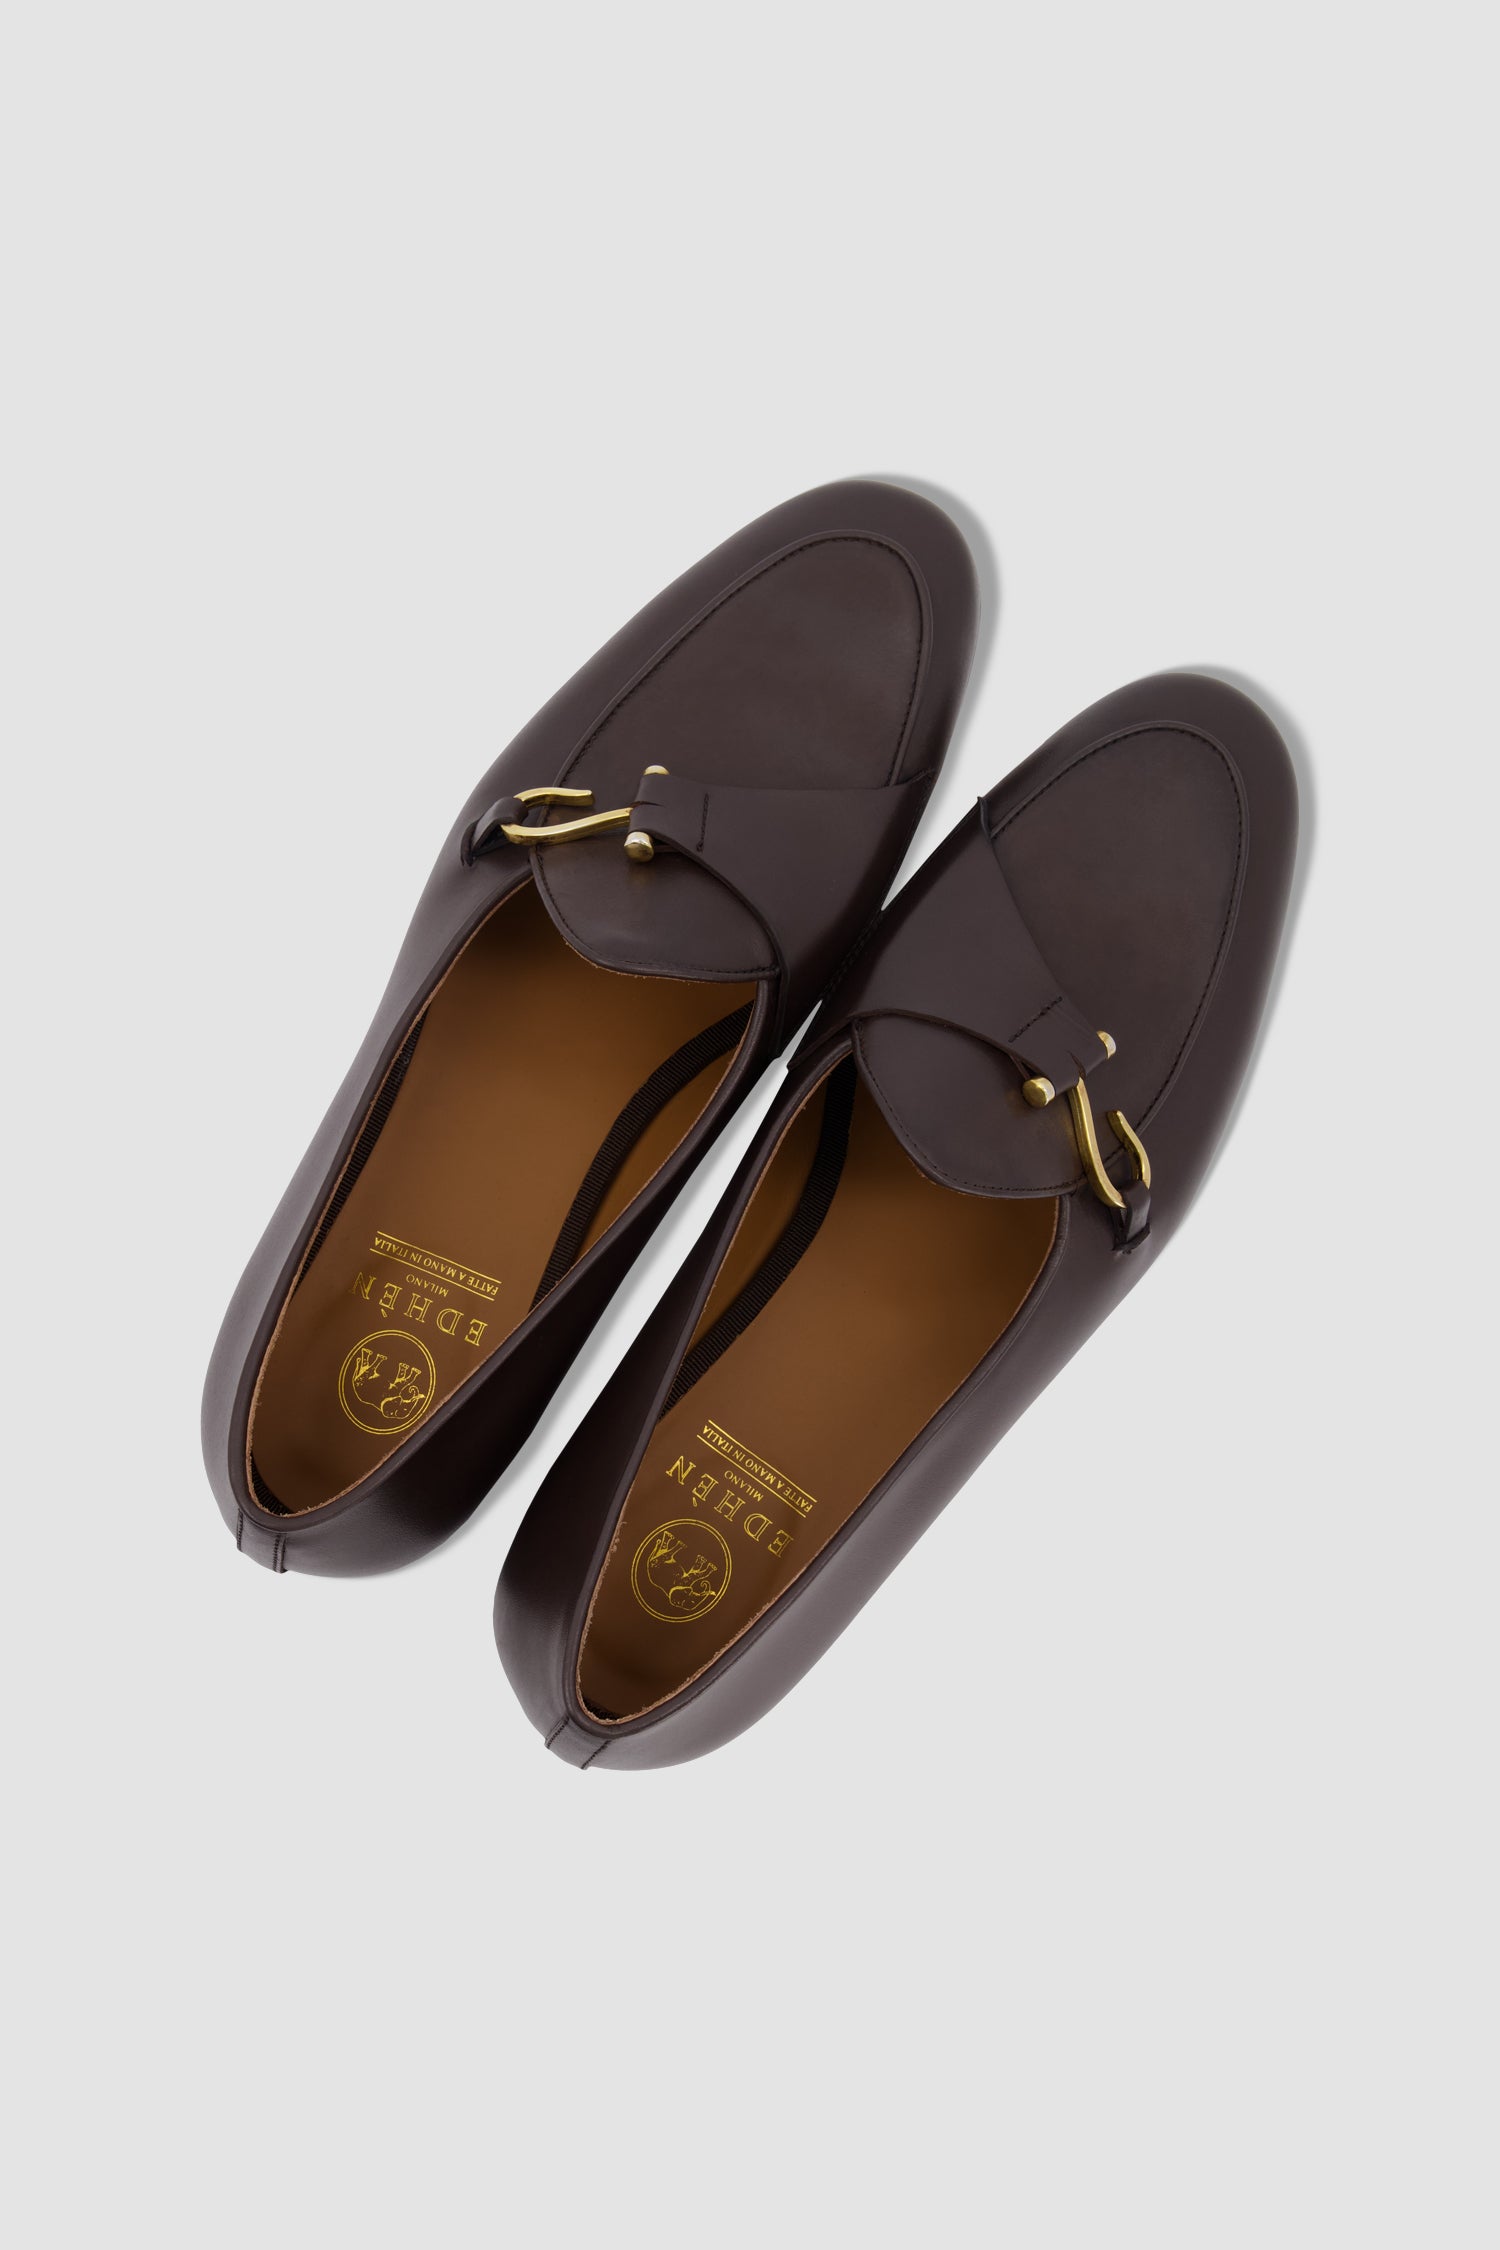 Edhen Milano Comporta Brown Leather Loafers